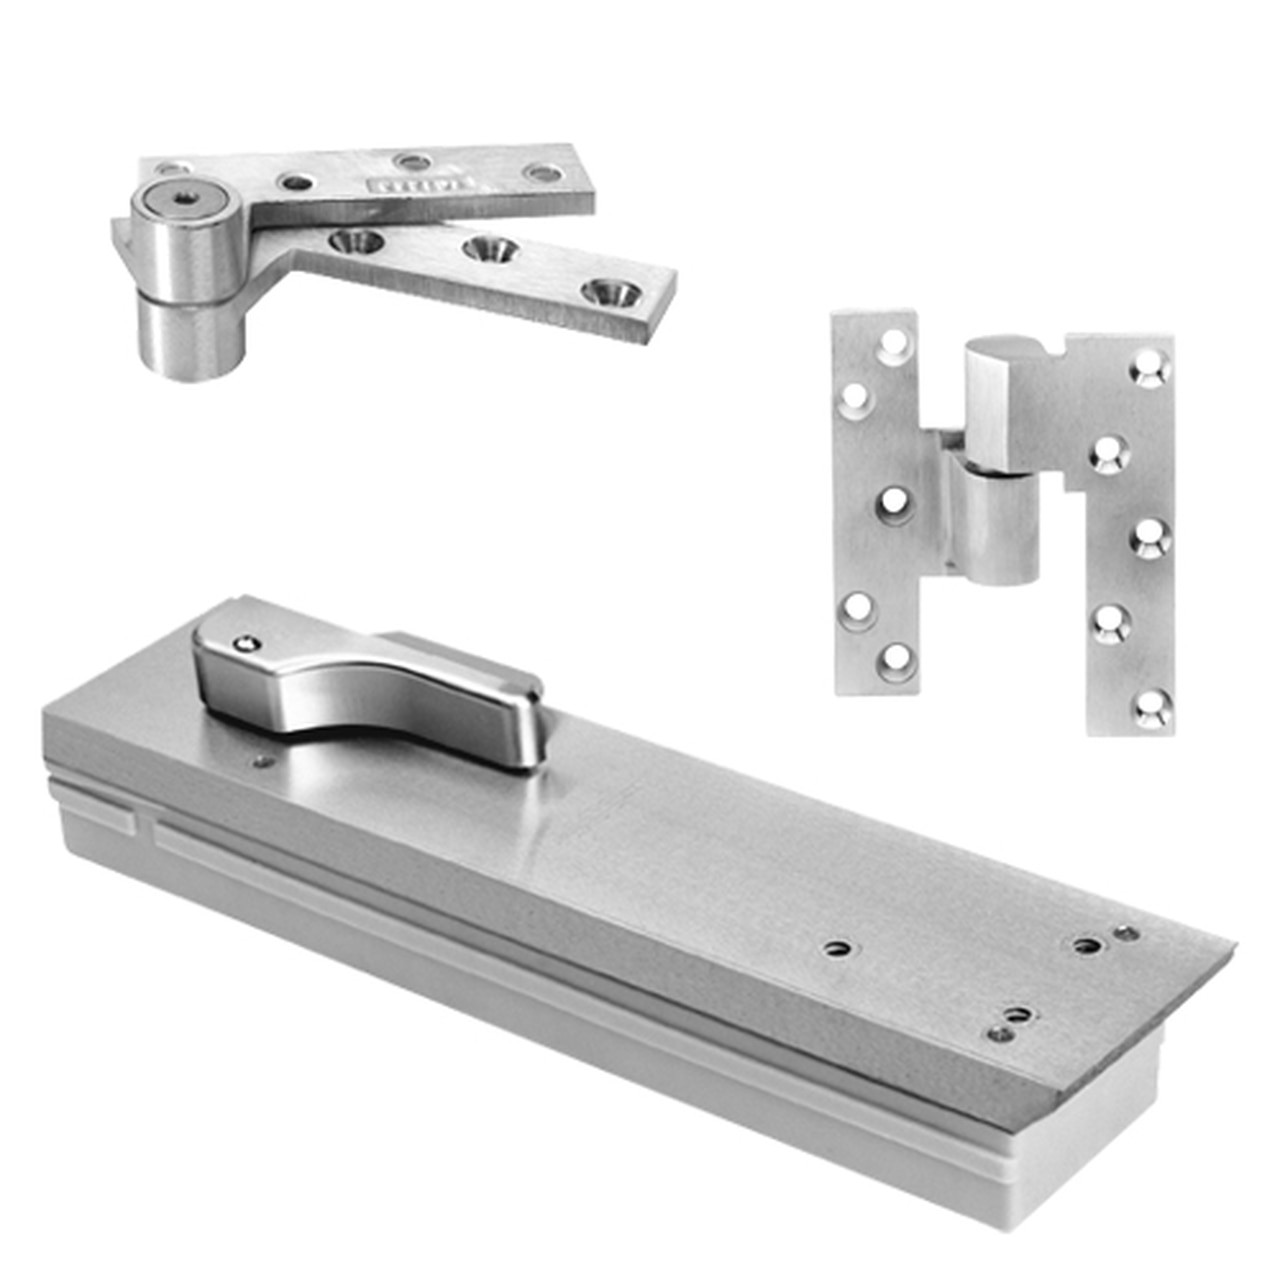 FQ5104NBC-SC-RH-625 Rixson Q51 Series Fire Rated 3/4" Offset Hung Shallow Depth Floor Closers in Bright Chrome Finish